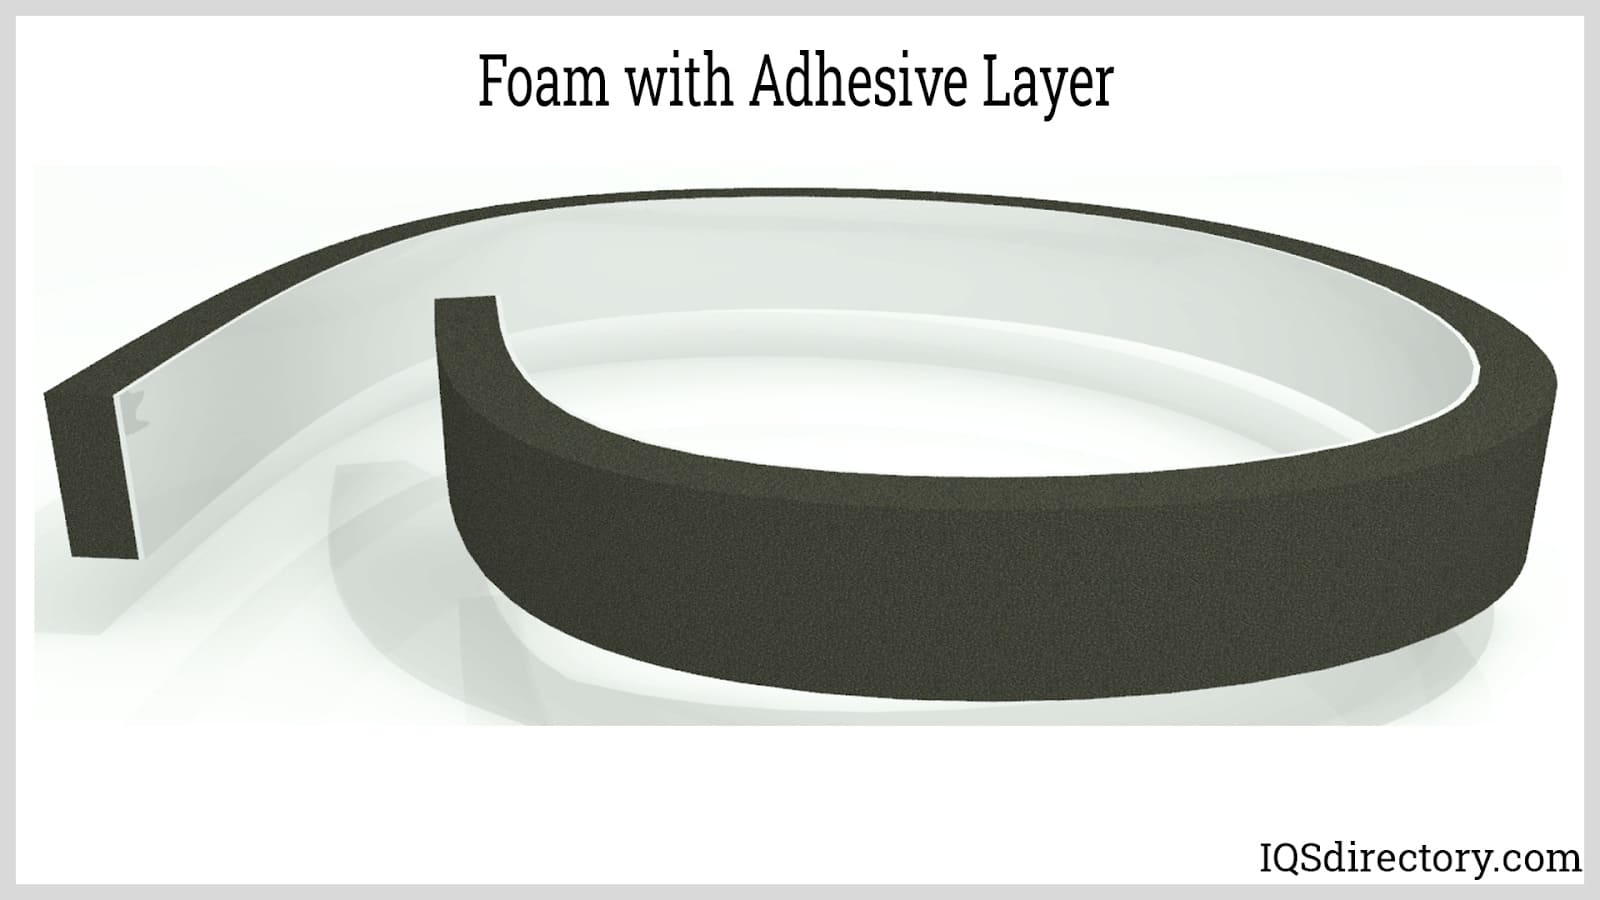 Foam with Adhesive Layer